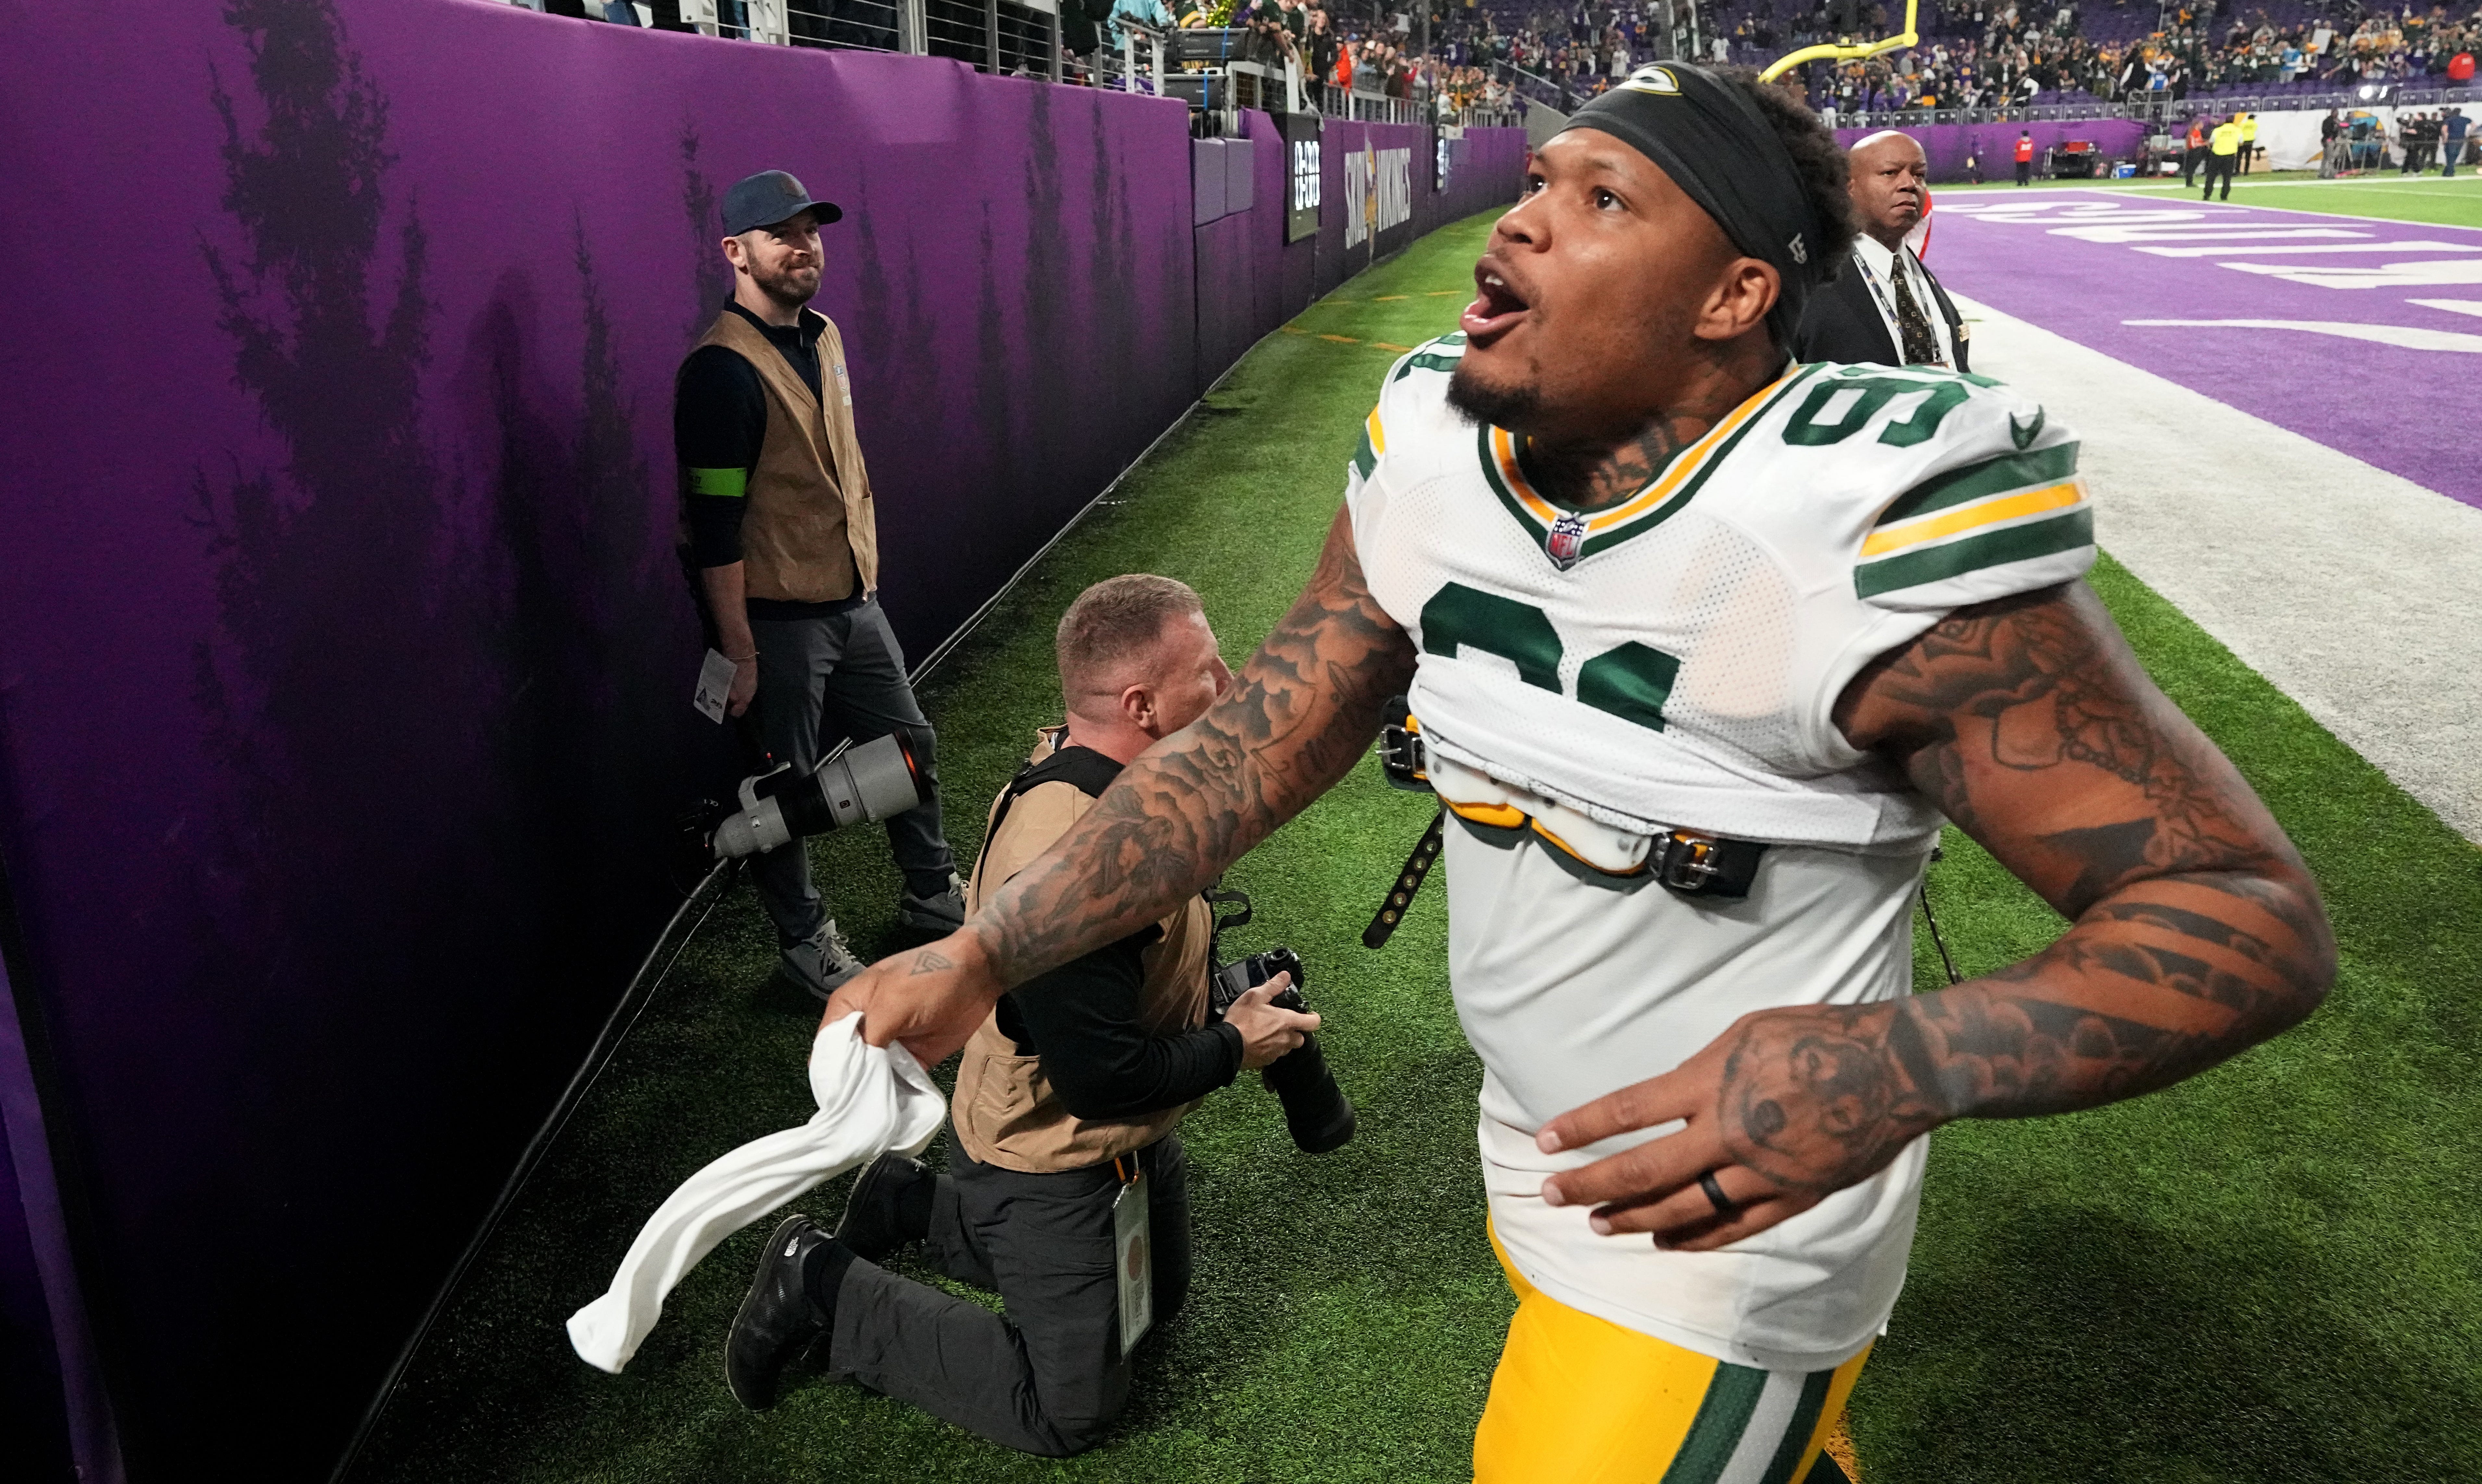 Green Bay Packers linebacker Preston Smith (91) celebrates his team’s win after their game Sunday, December 31, 2023 at U.S. Bank Stadium in Minneapolis, Minnesota. The Green Bay Packers beat the Minnesota Vikings 33-10.